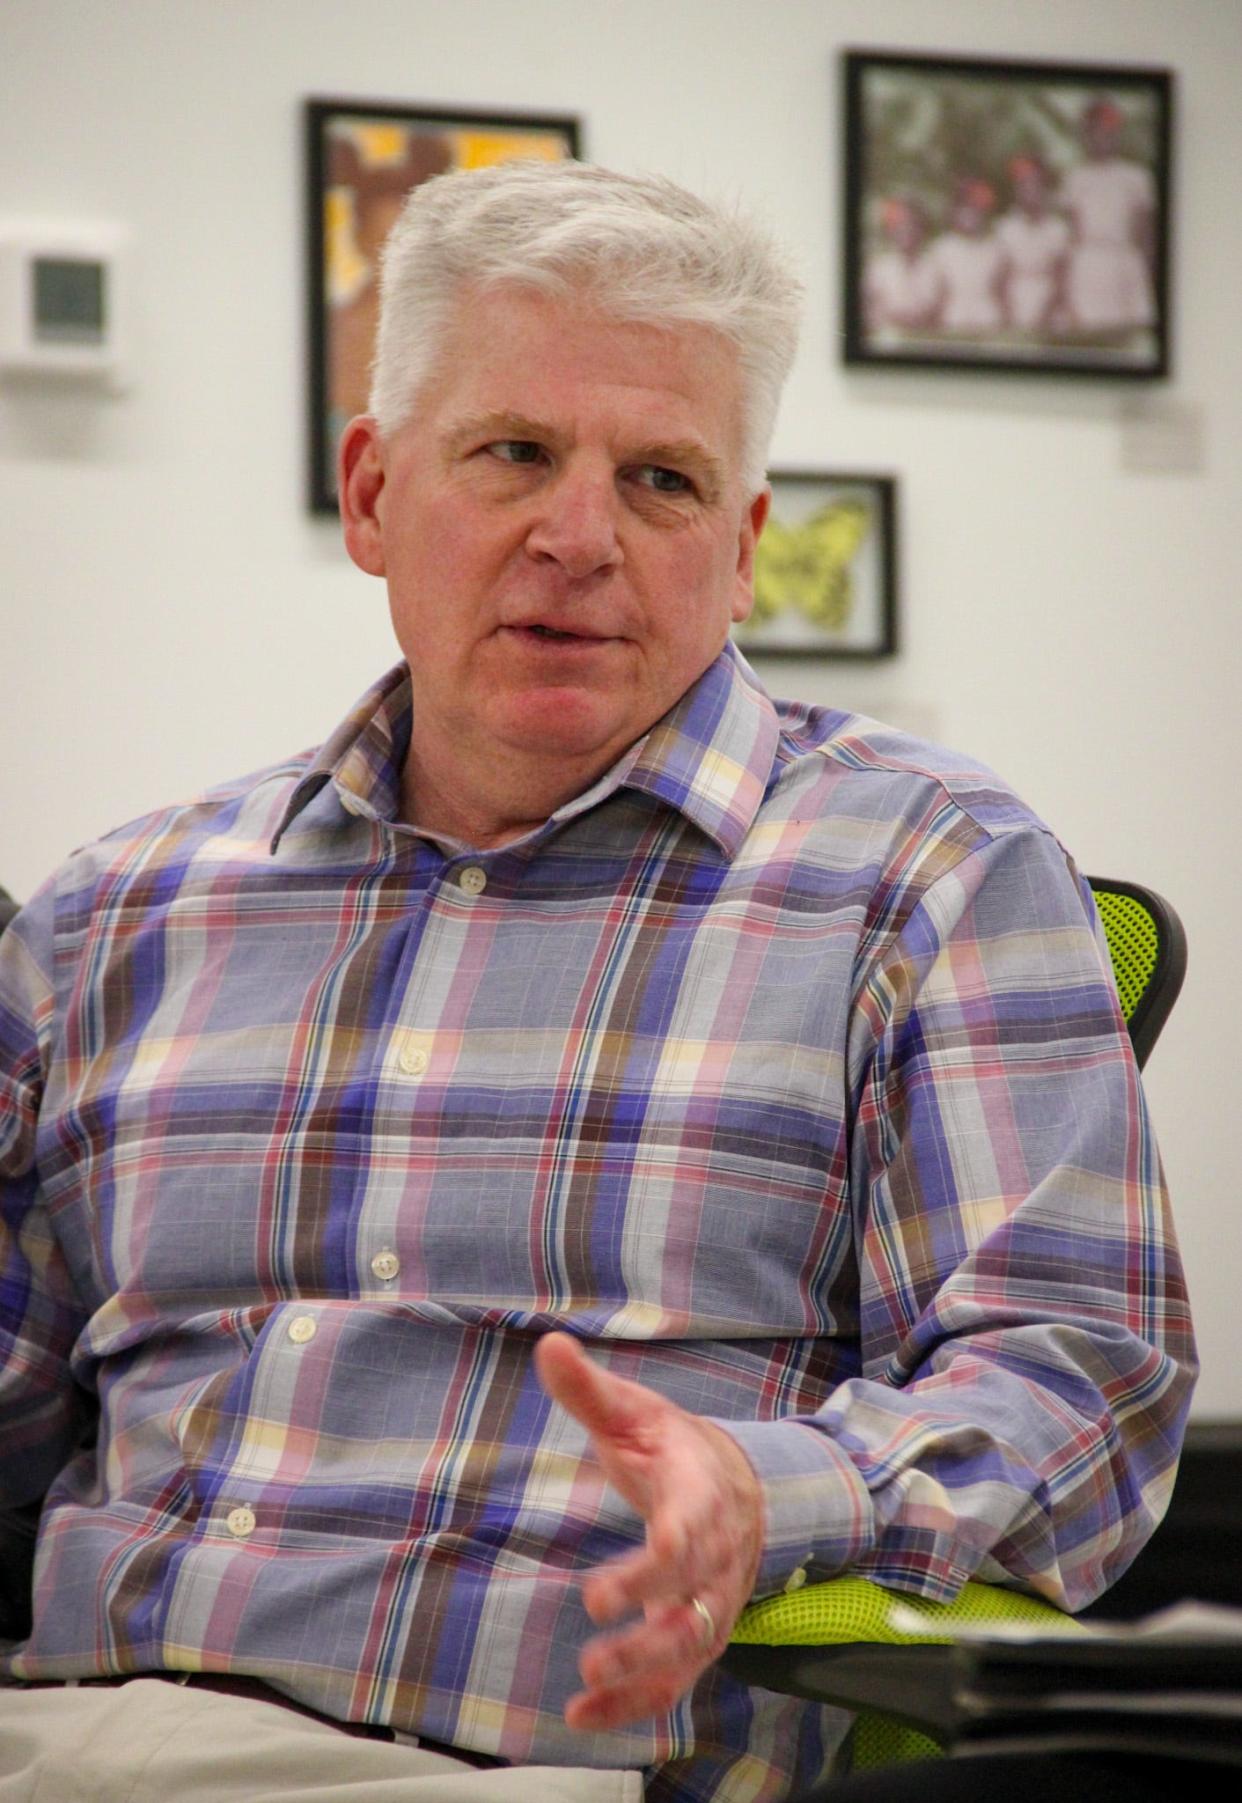 Explore New England Executive Producer and host Tom Richardson speaks about how to promote outdoors tourism in Fall River, at the Fall River Arts and Culture Coalition Ignition Space, 44 Troy St., on Wednesday, Jan. 24.